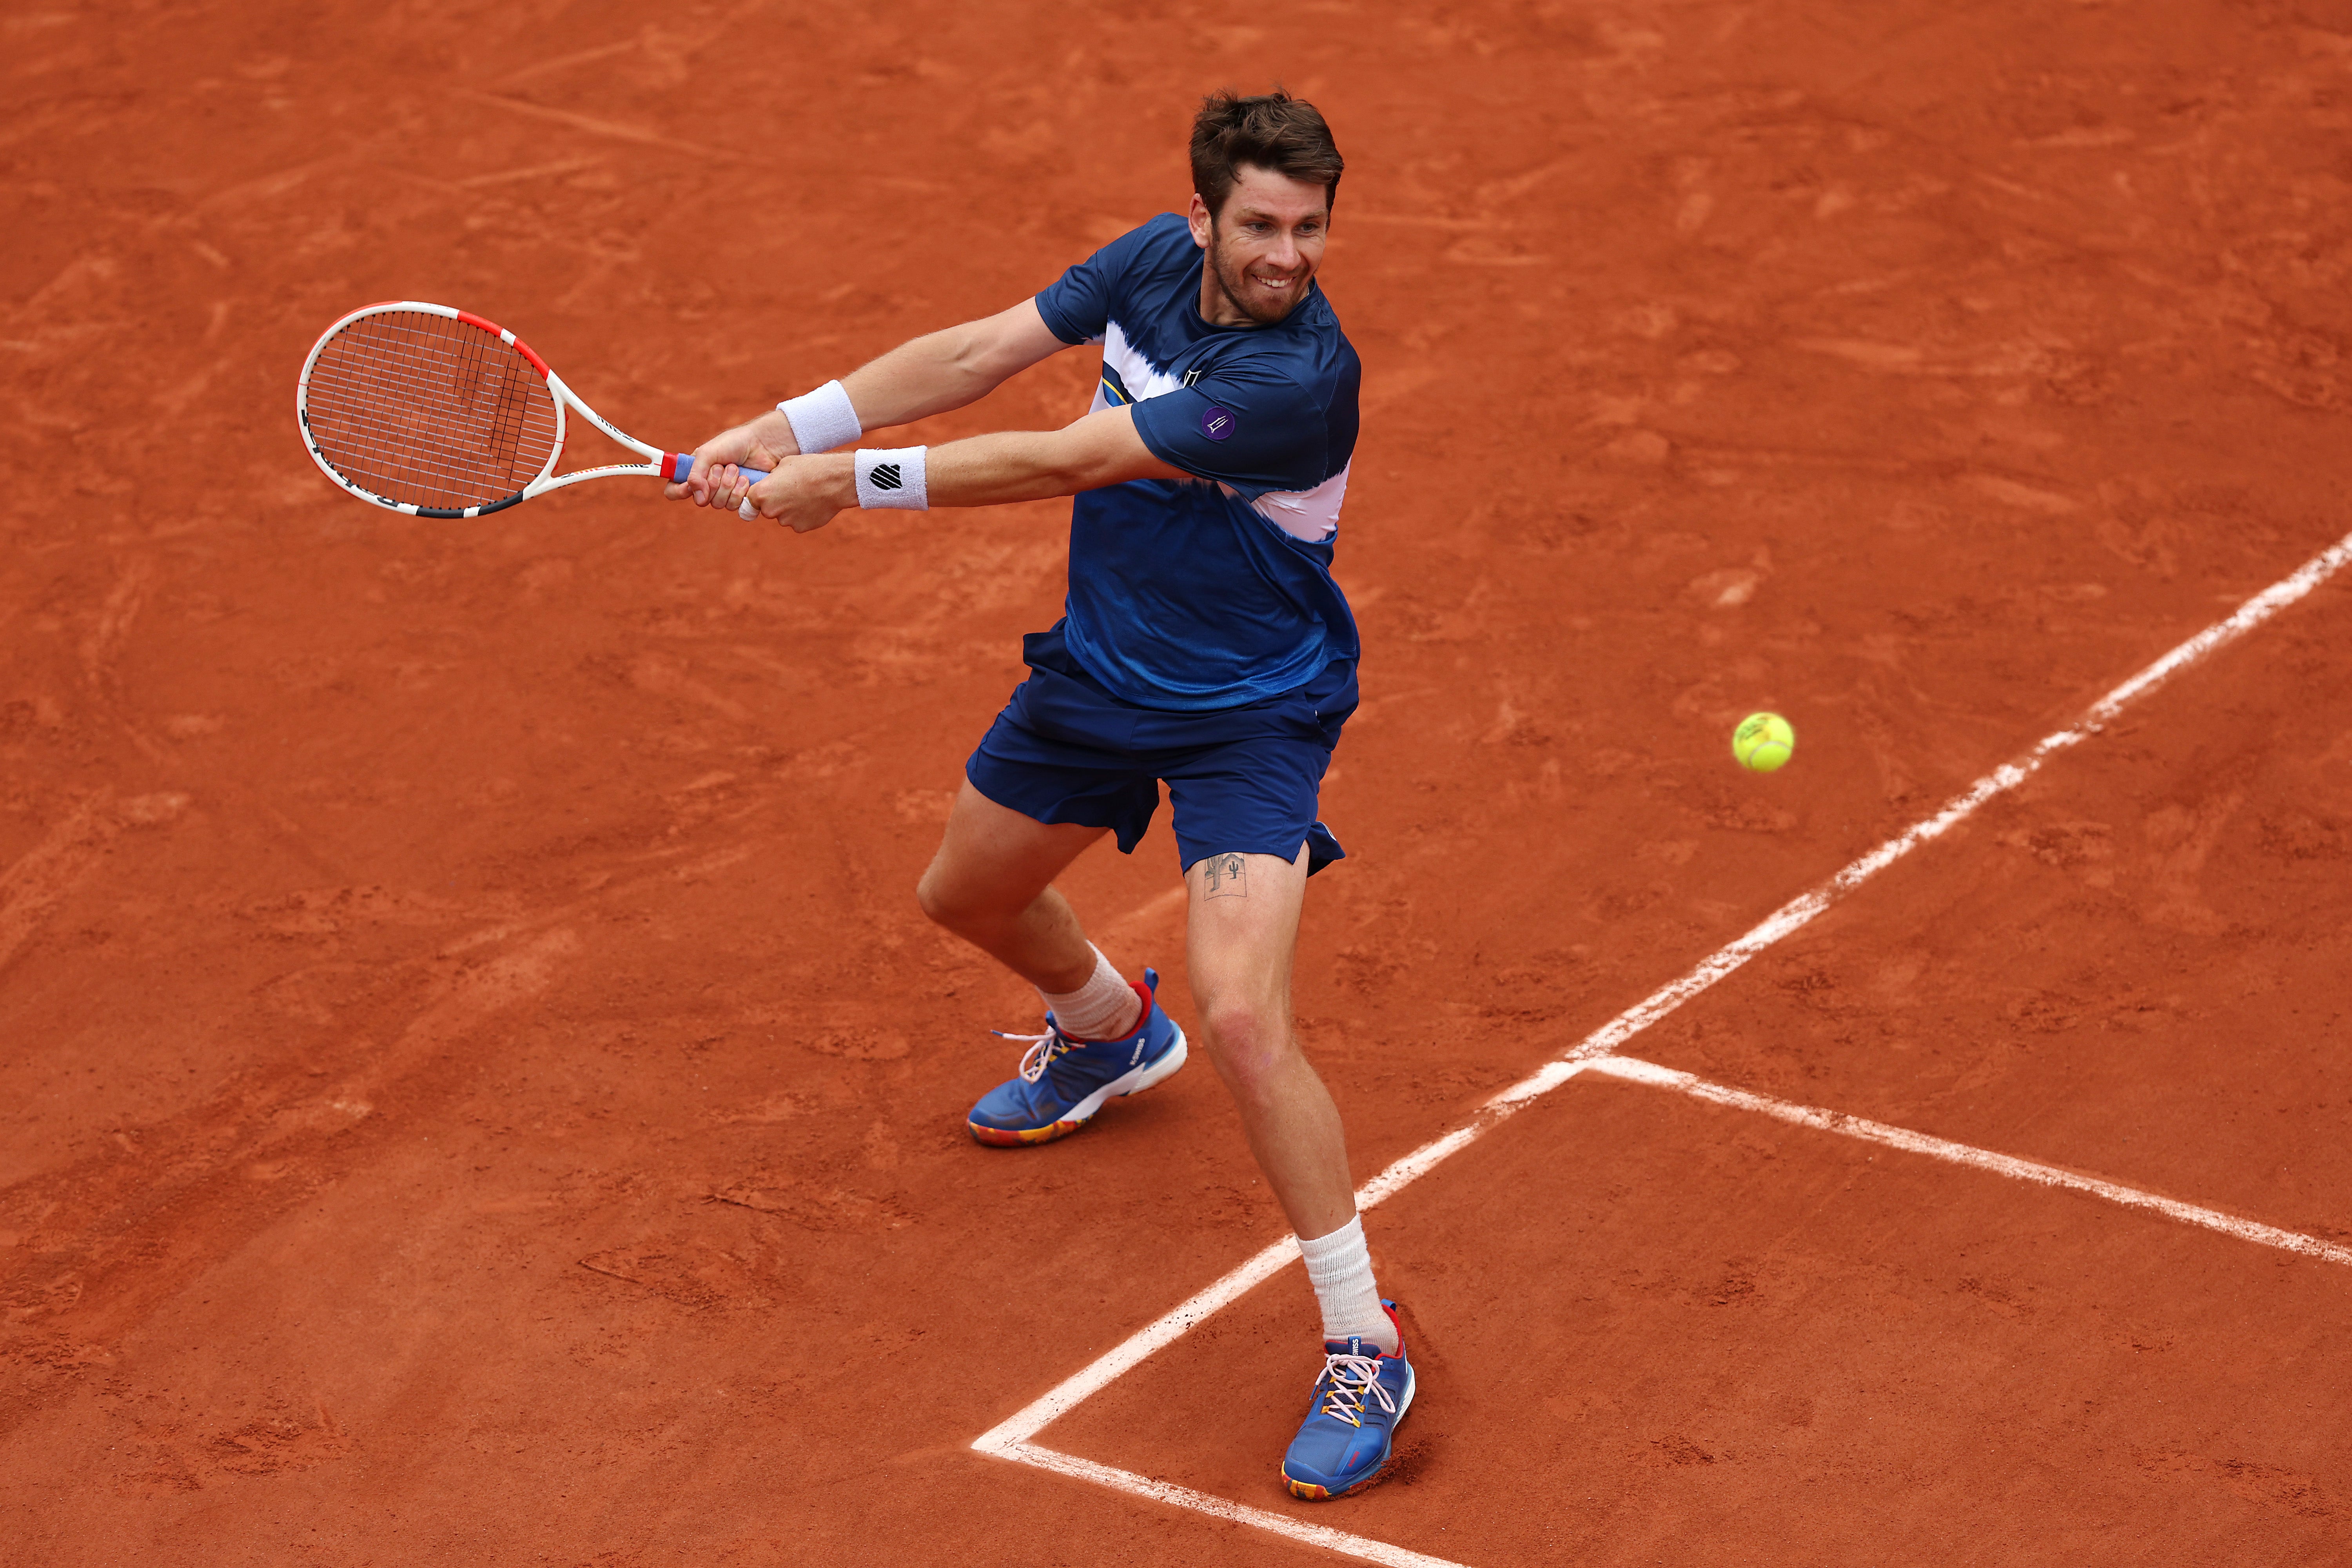 Cameron Norrie is the leading British player at Roland Garros this year